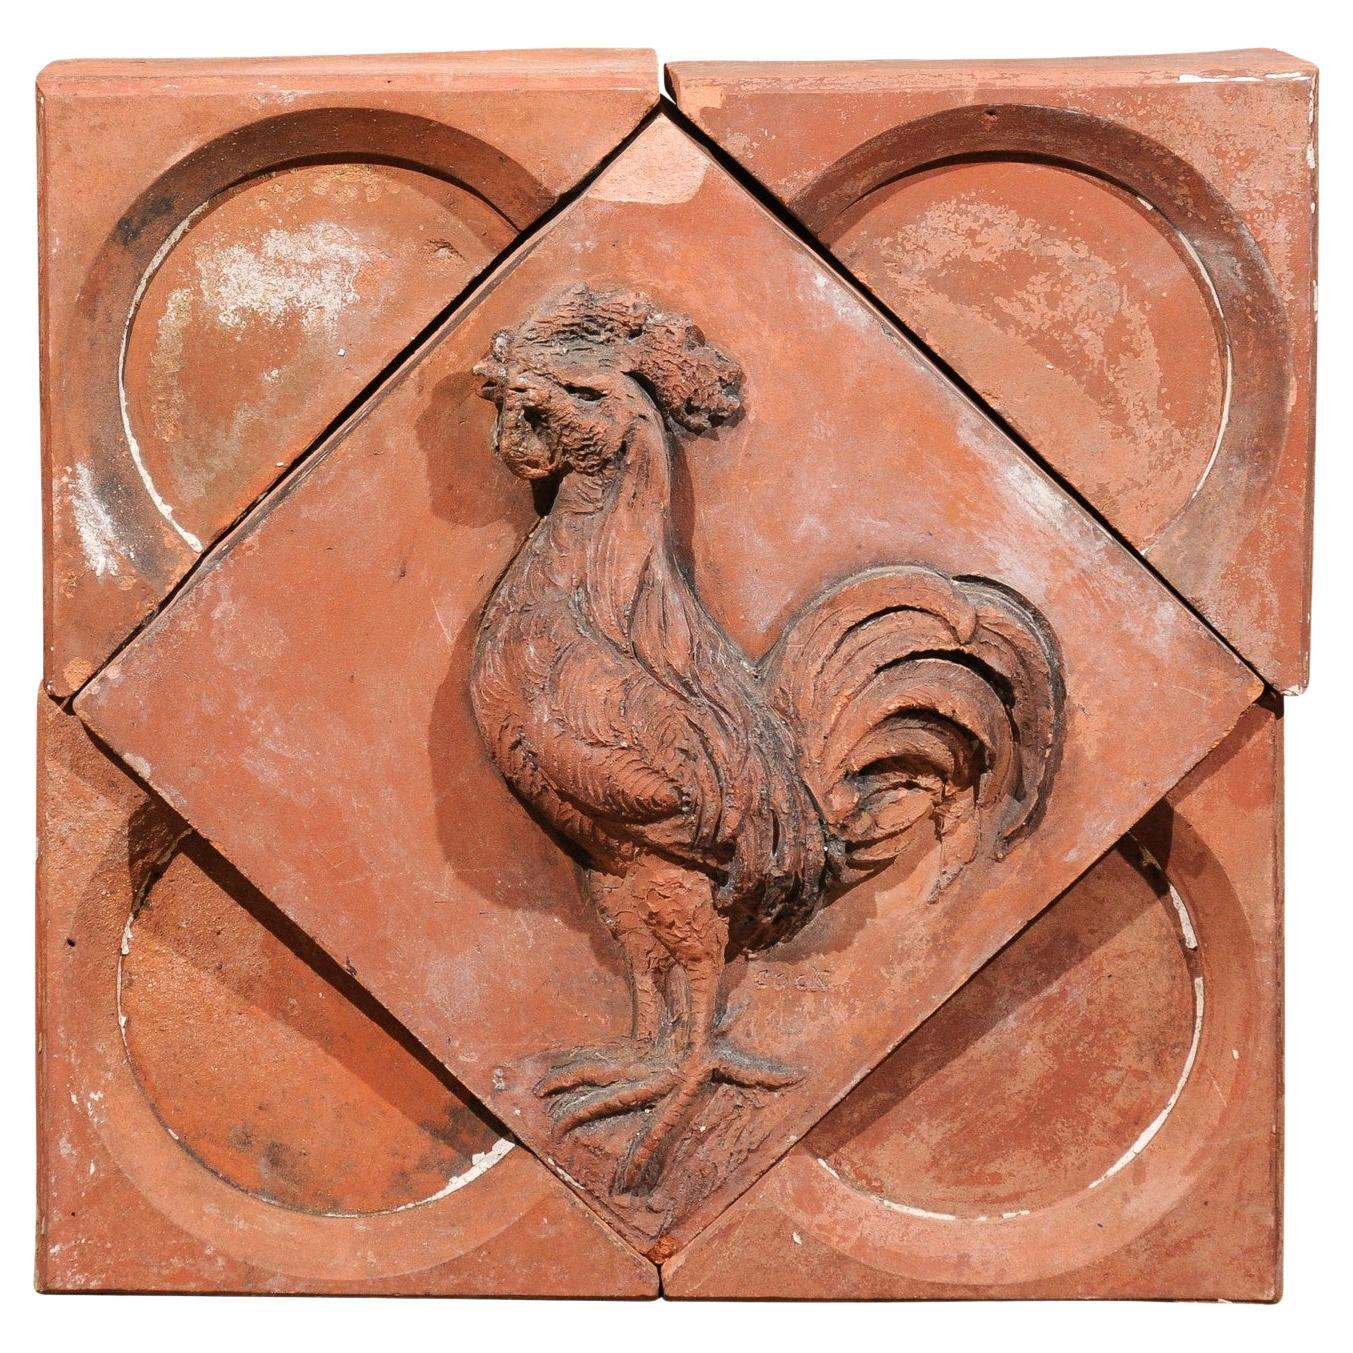 French 1880s Red Terracotta Panel Depicting a Rooster on a Quadrilobe